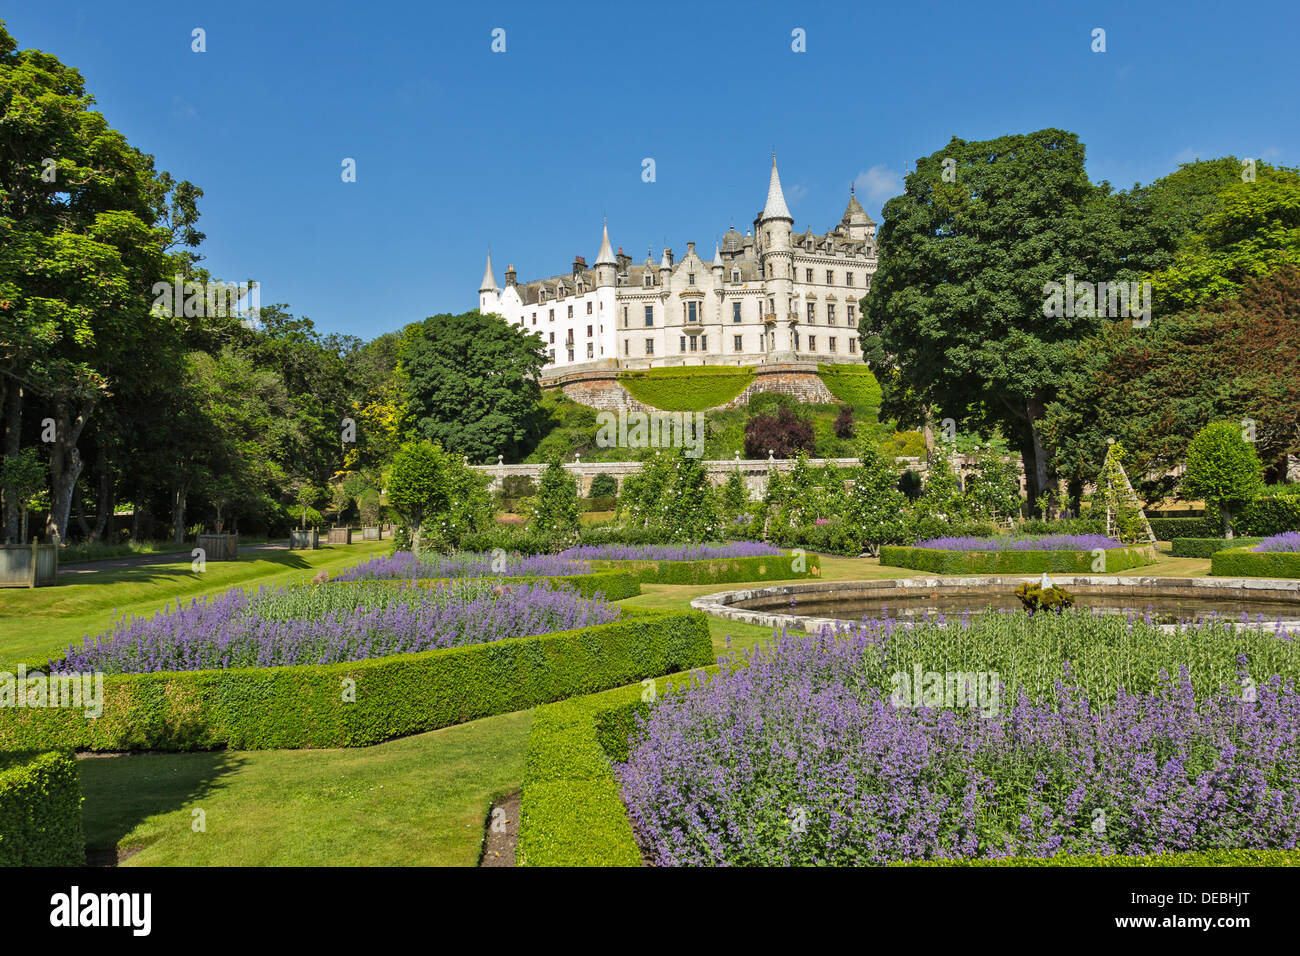 DUNROBIN CASTLE GOLSPIE SUTHERLAND SCOTLAND WITH BLUE CATMINT FLOWER BEDS Stock Photo